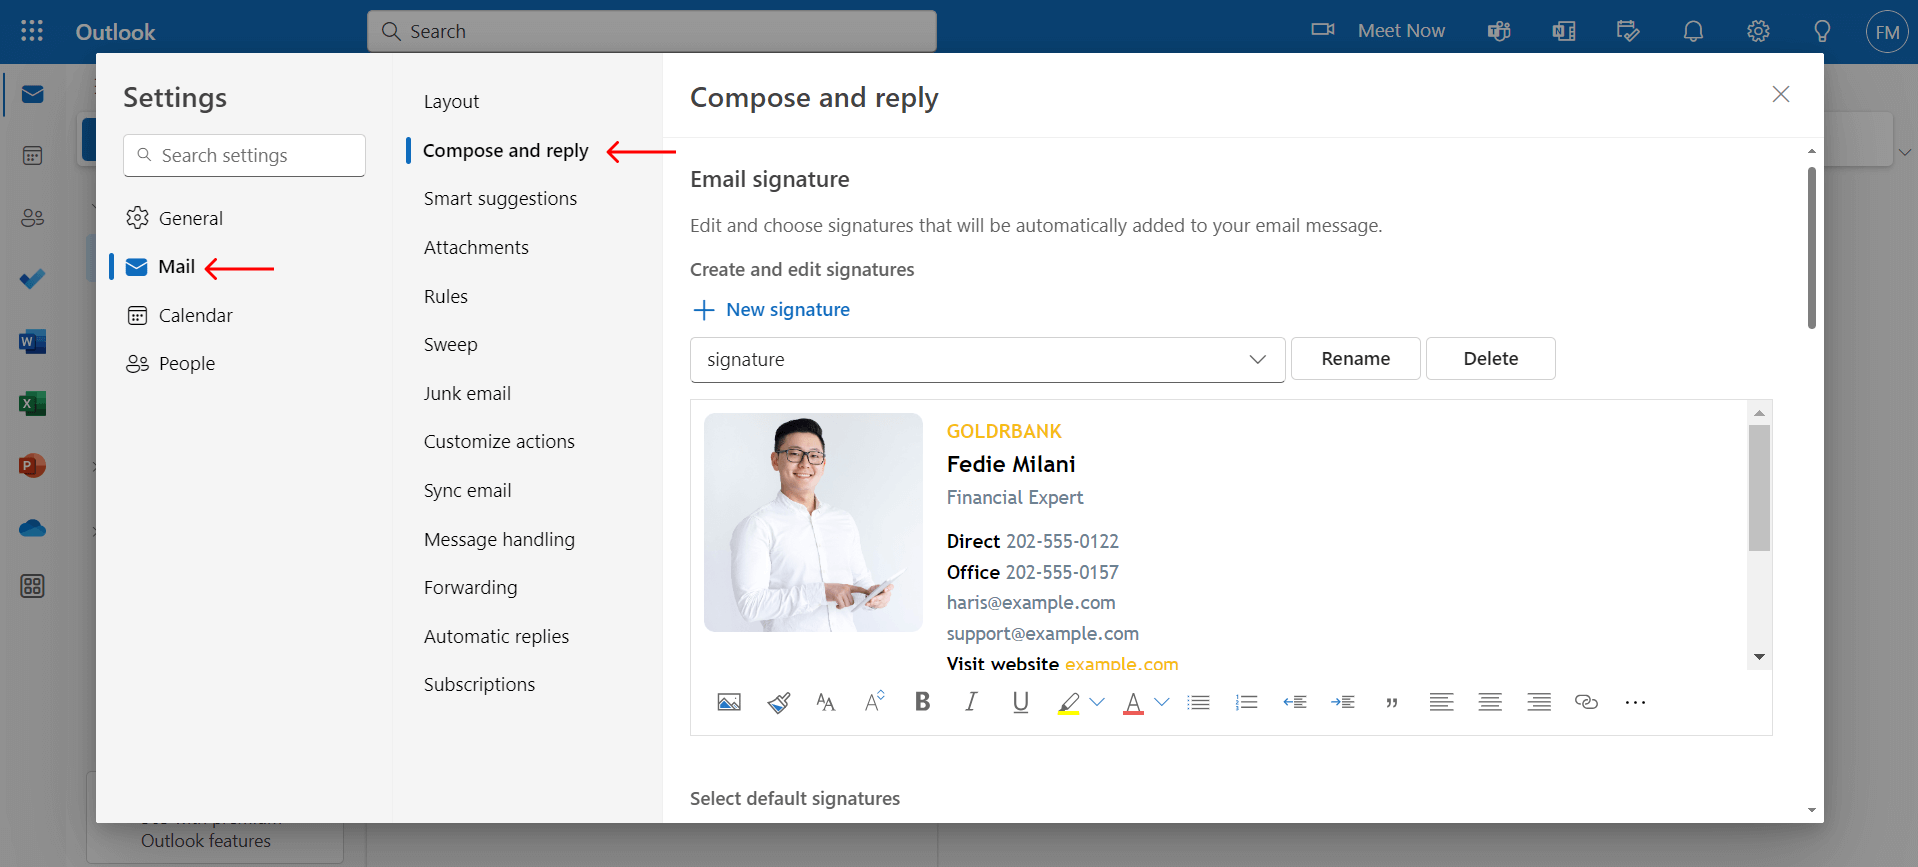 Compose and Reply section